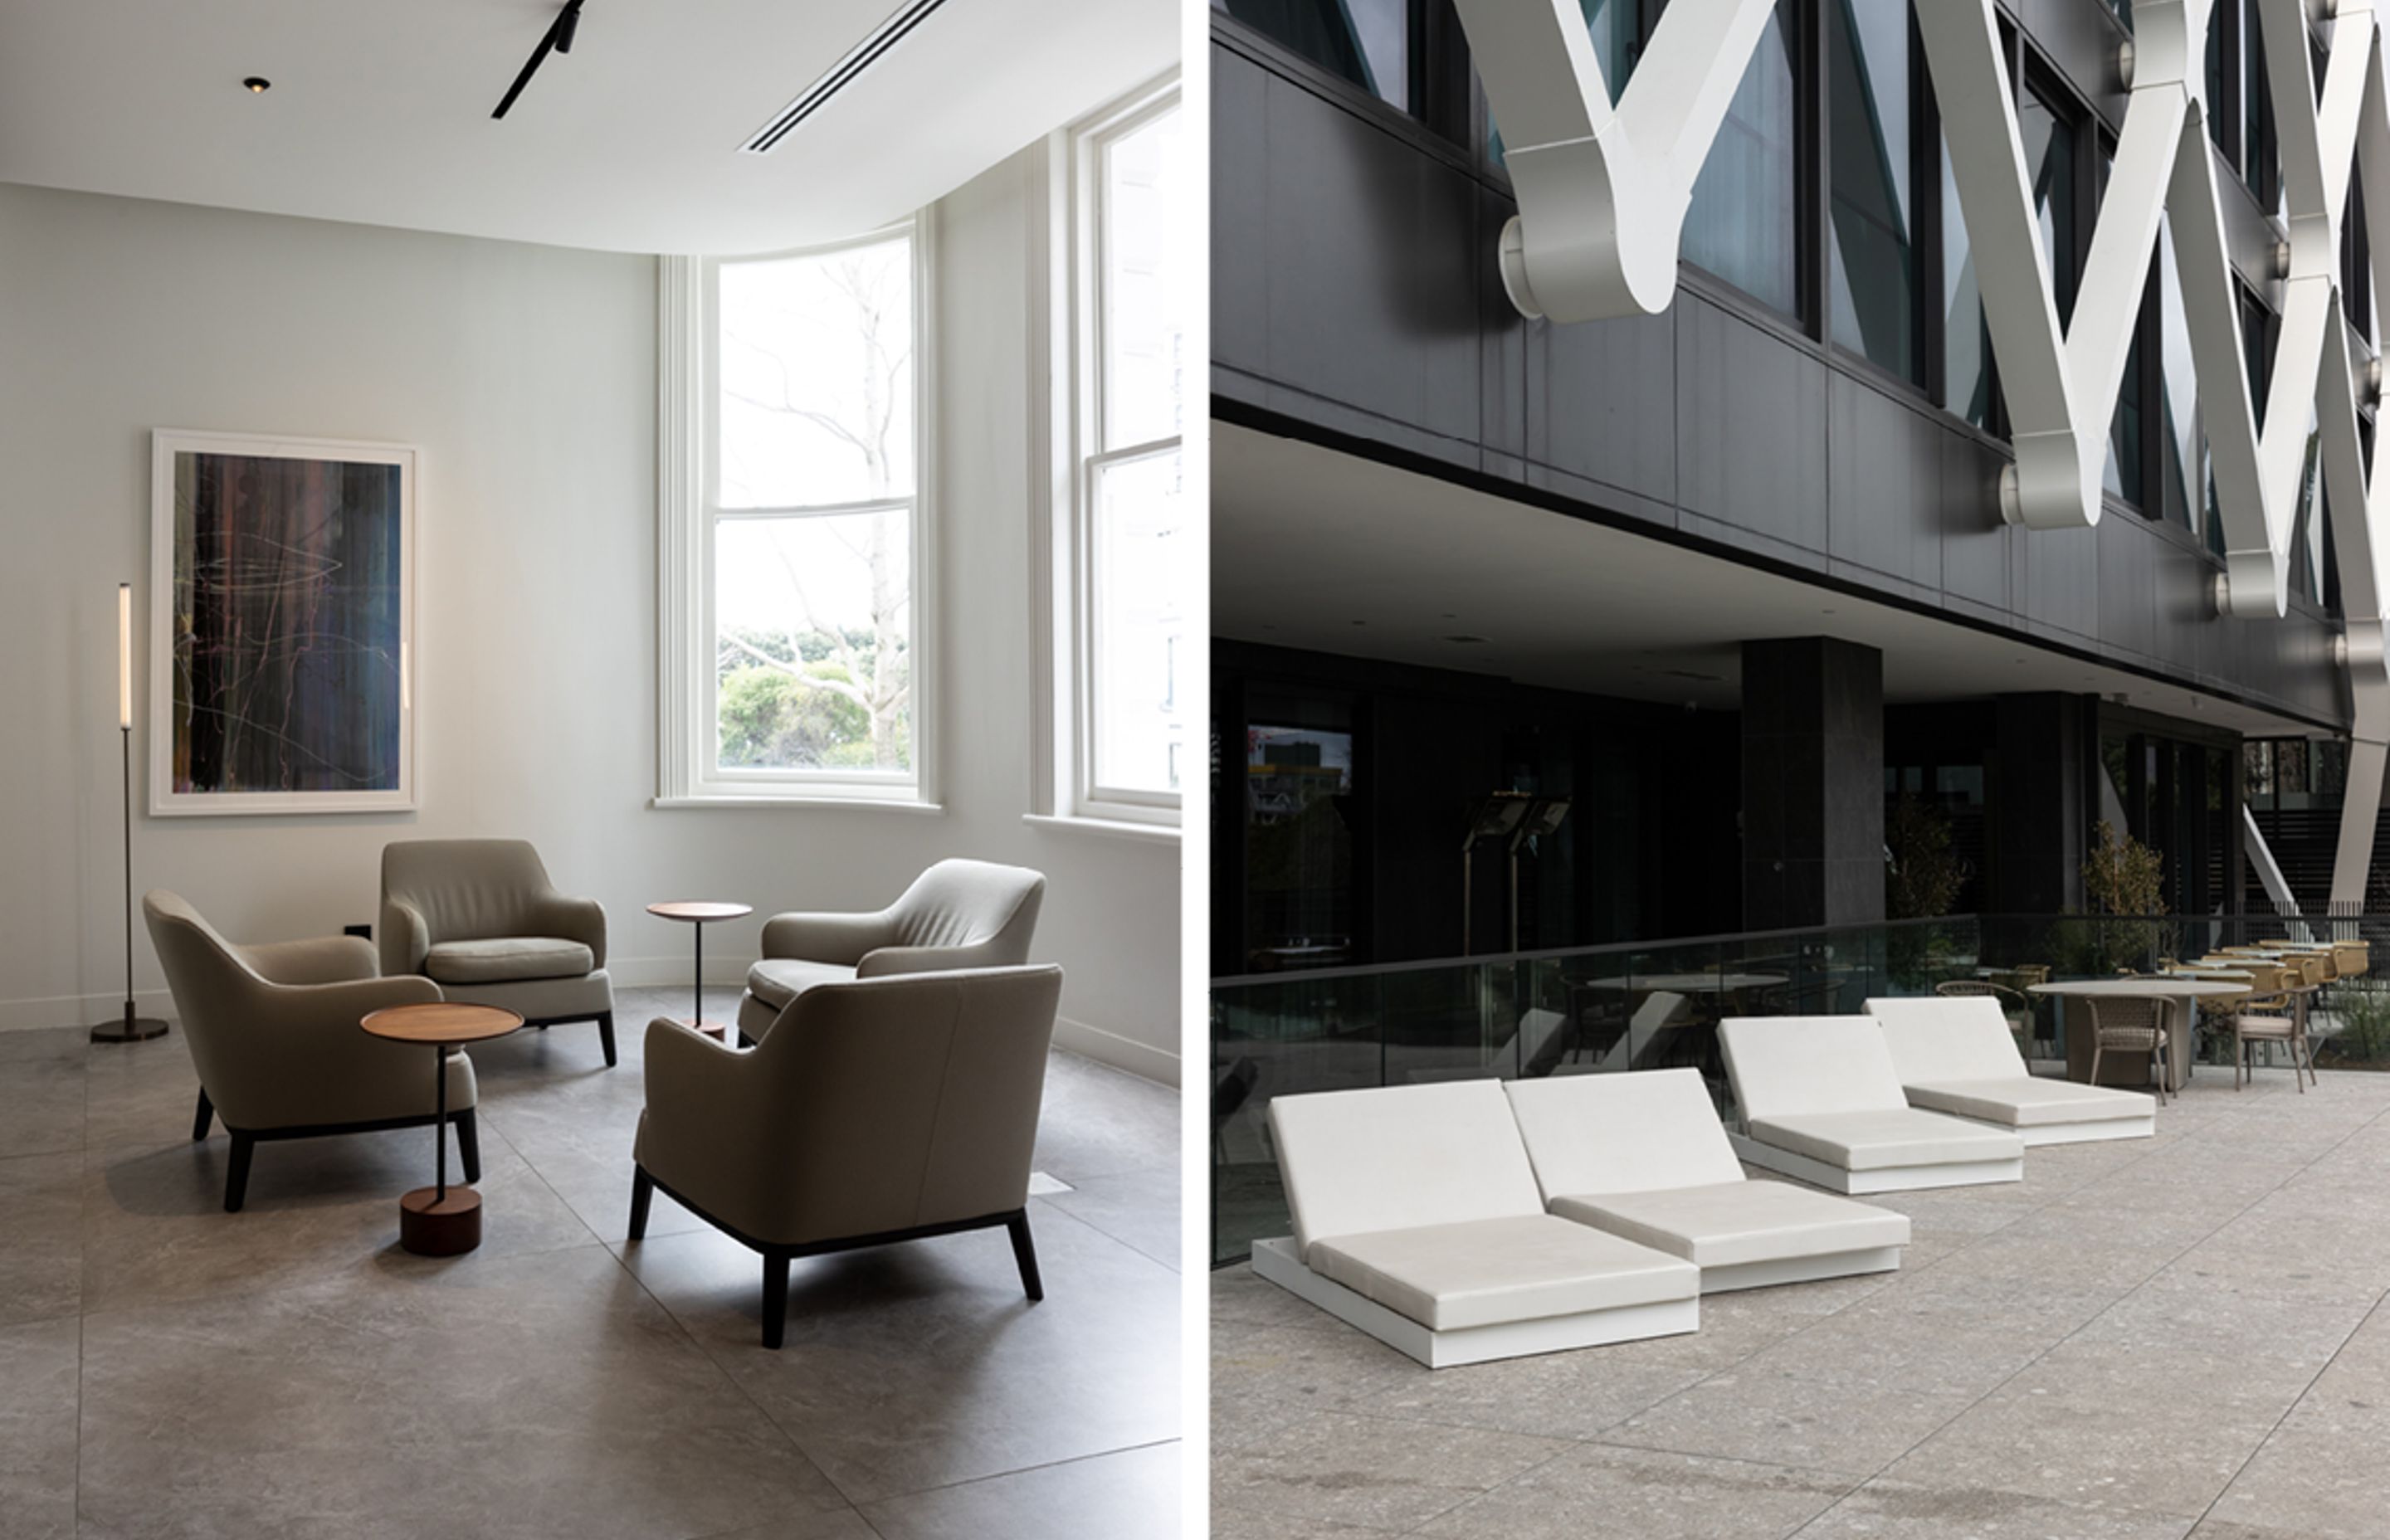 Febo armchairs have been teamed with '9' side tables in the concierge area, while poolside, Chill recliners sit alongside Tobi ishi tables and Erica dining chairs.